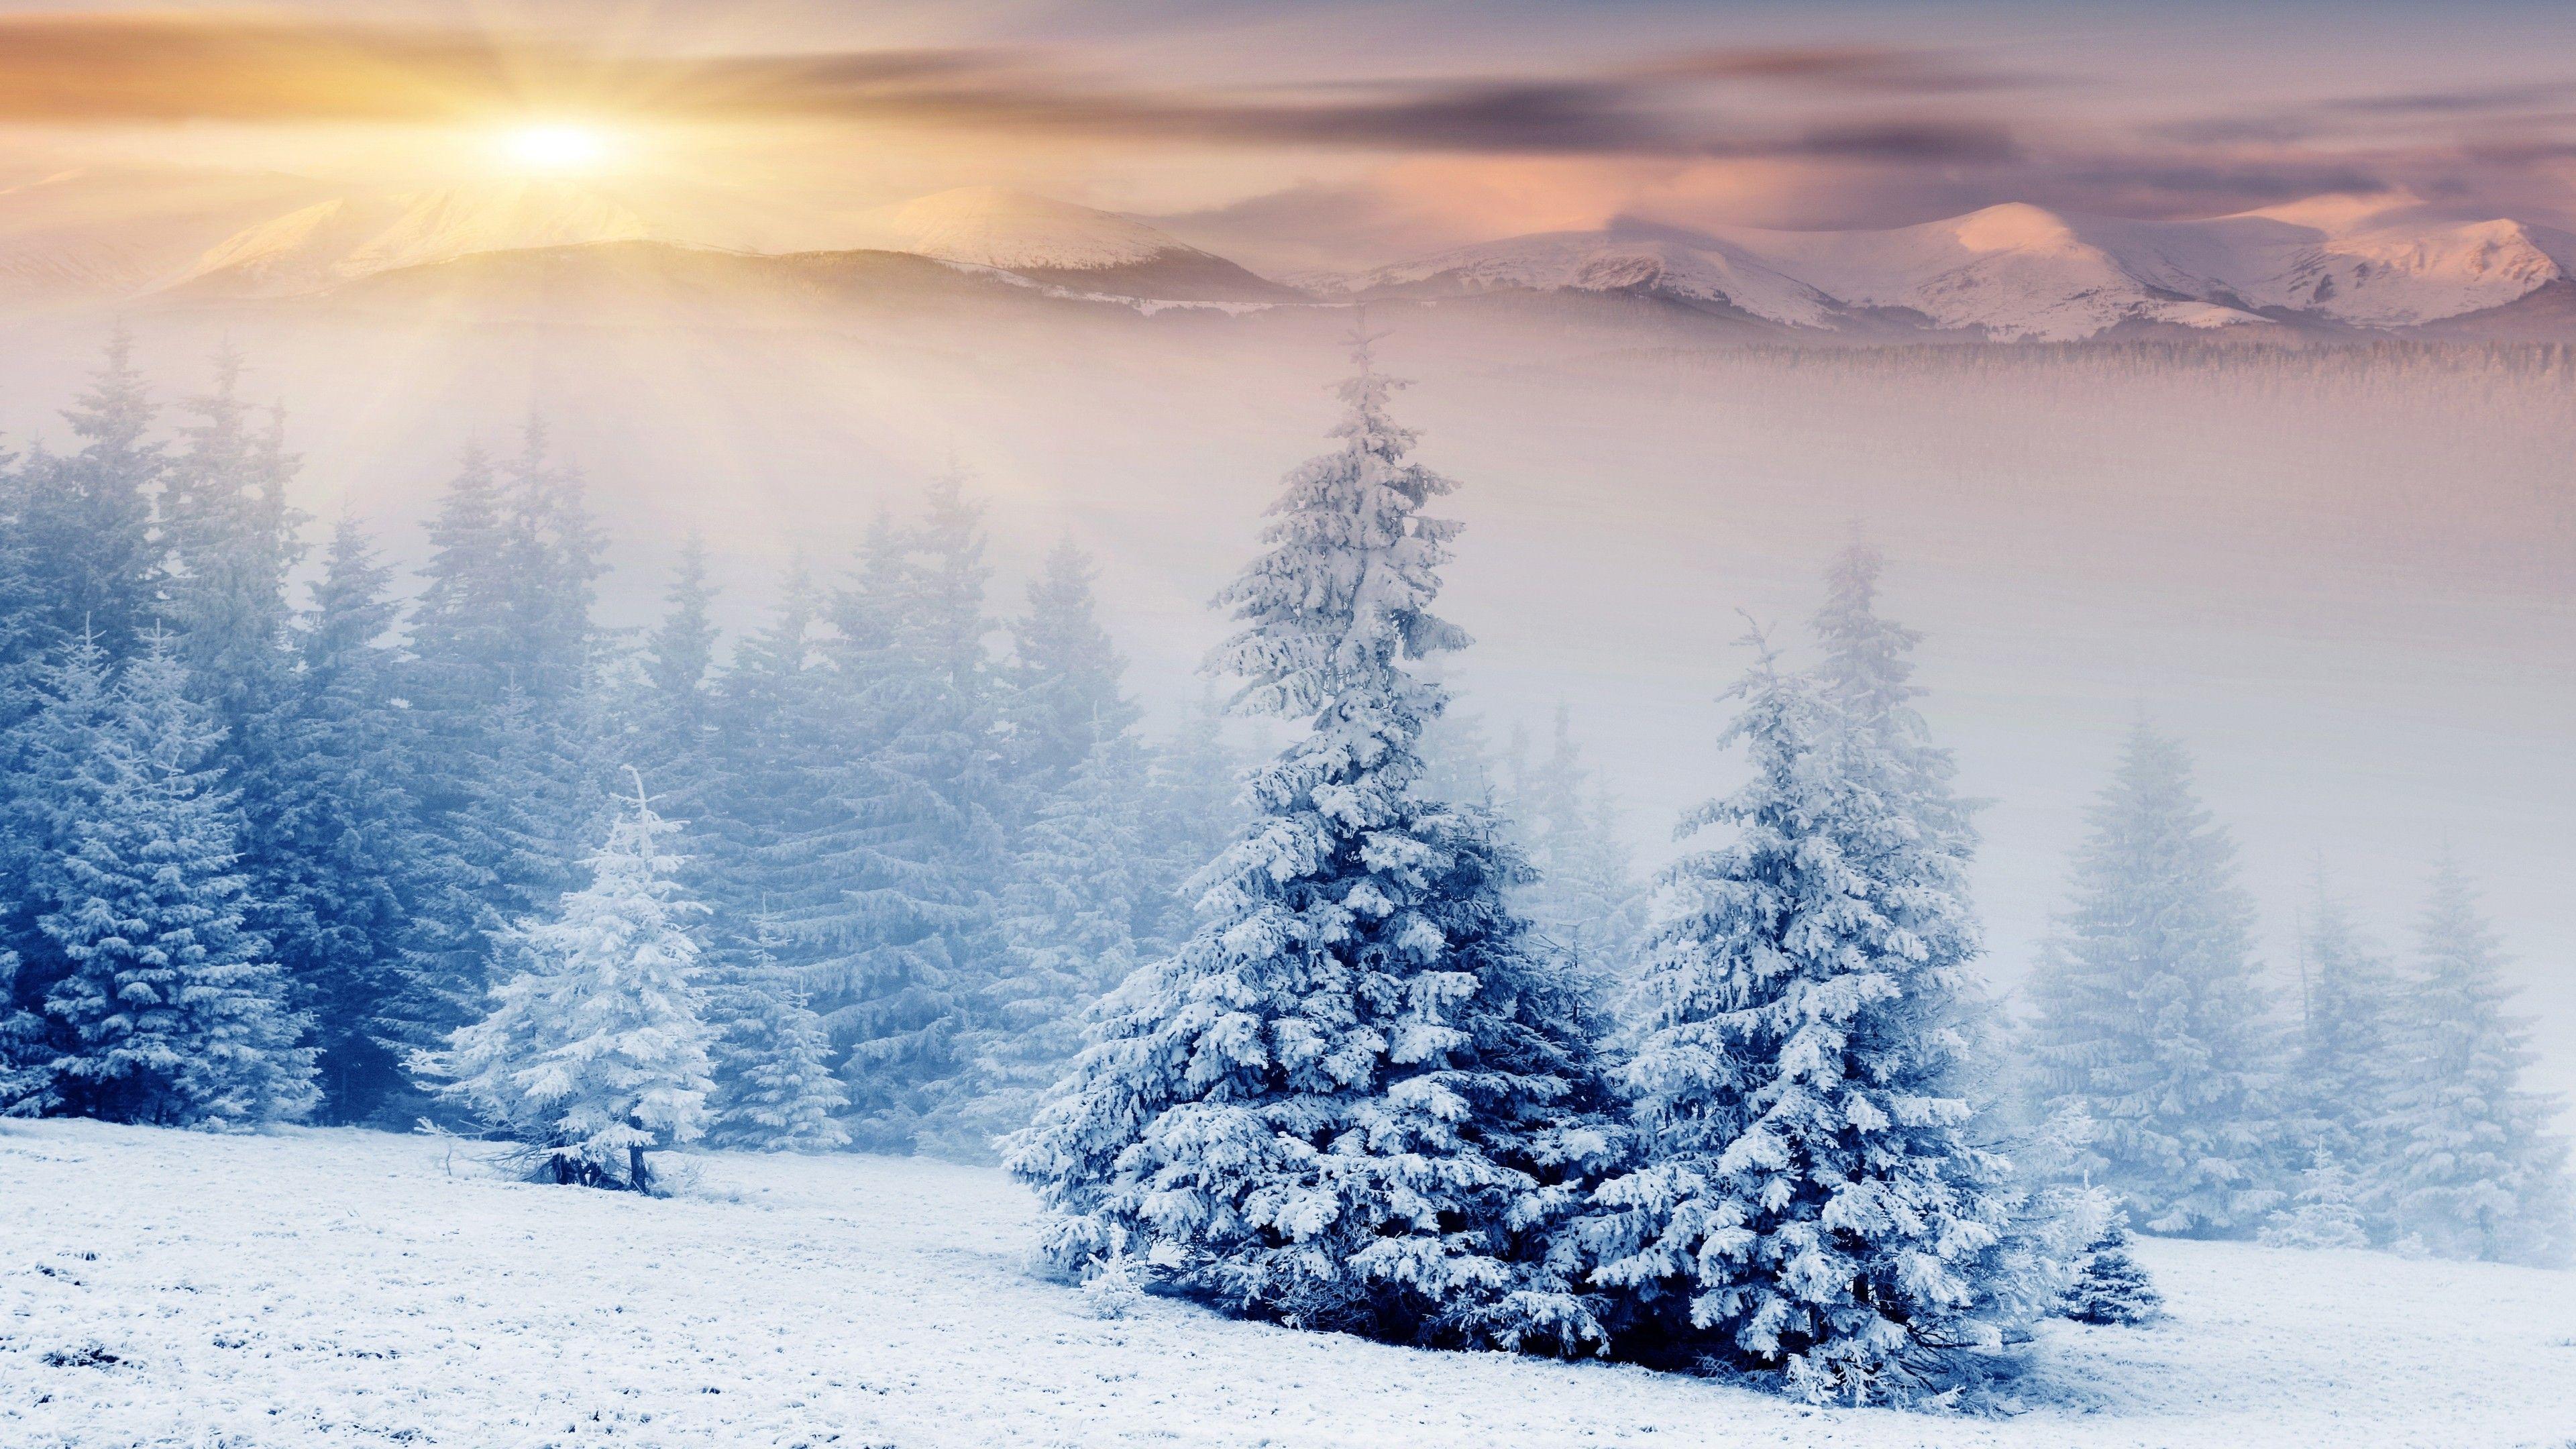 Snow covered Winter Trees Wallpapers  HD Wallpapers  ID 29988